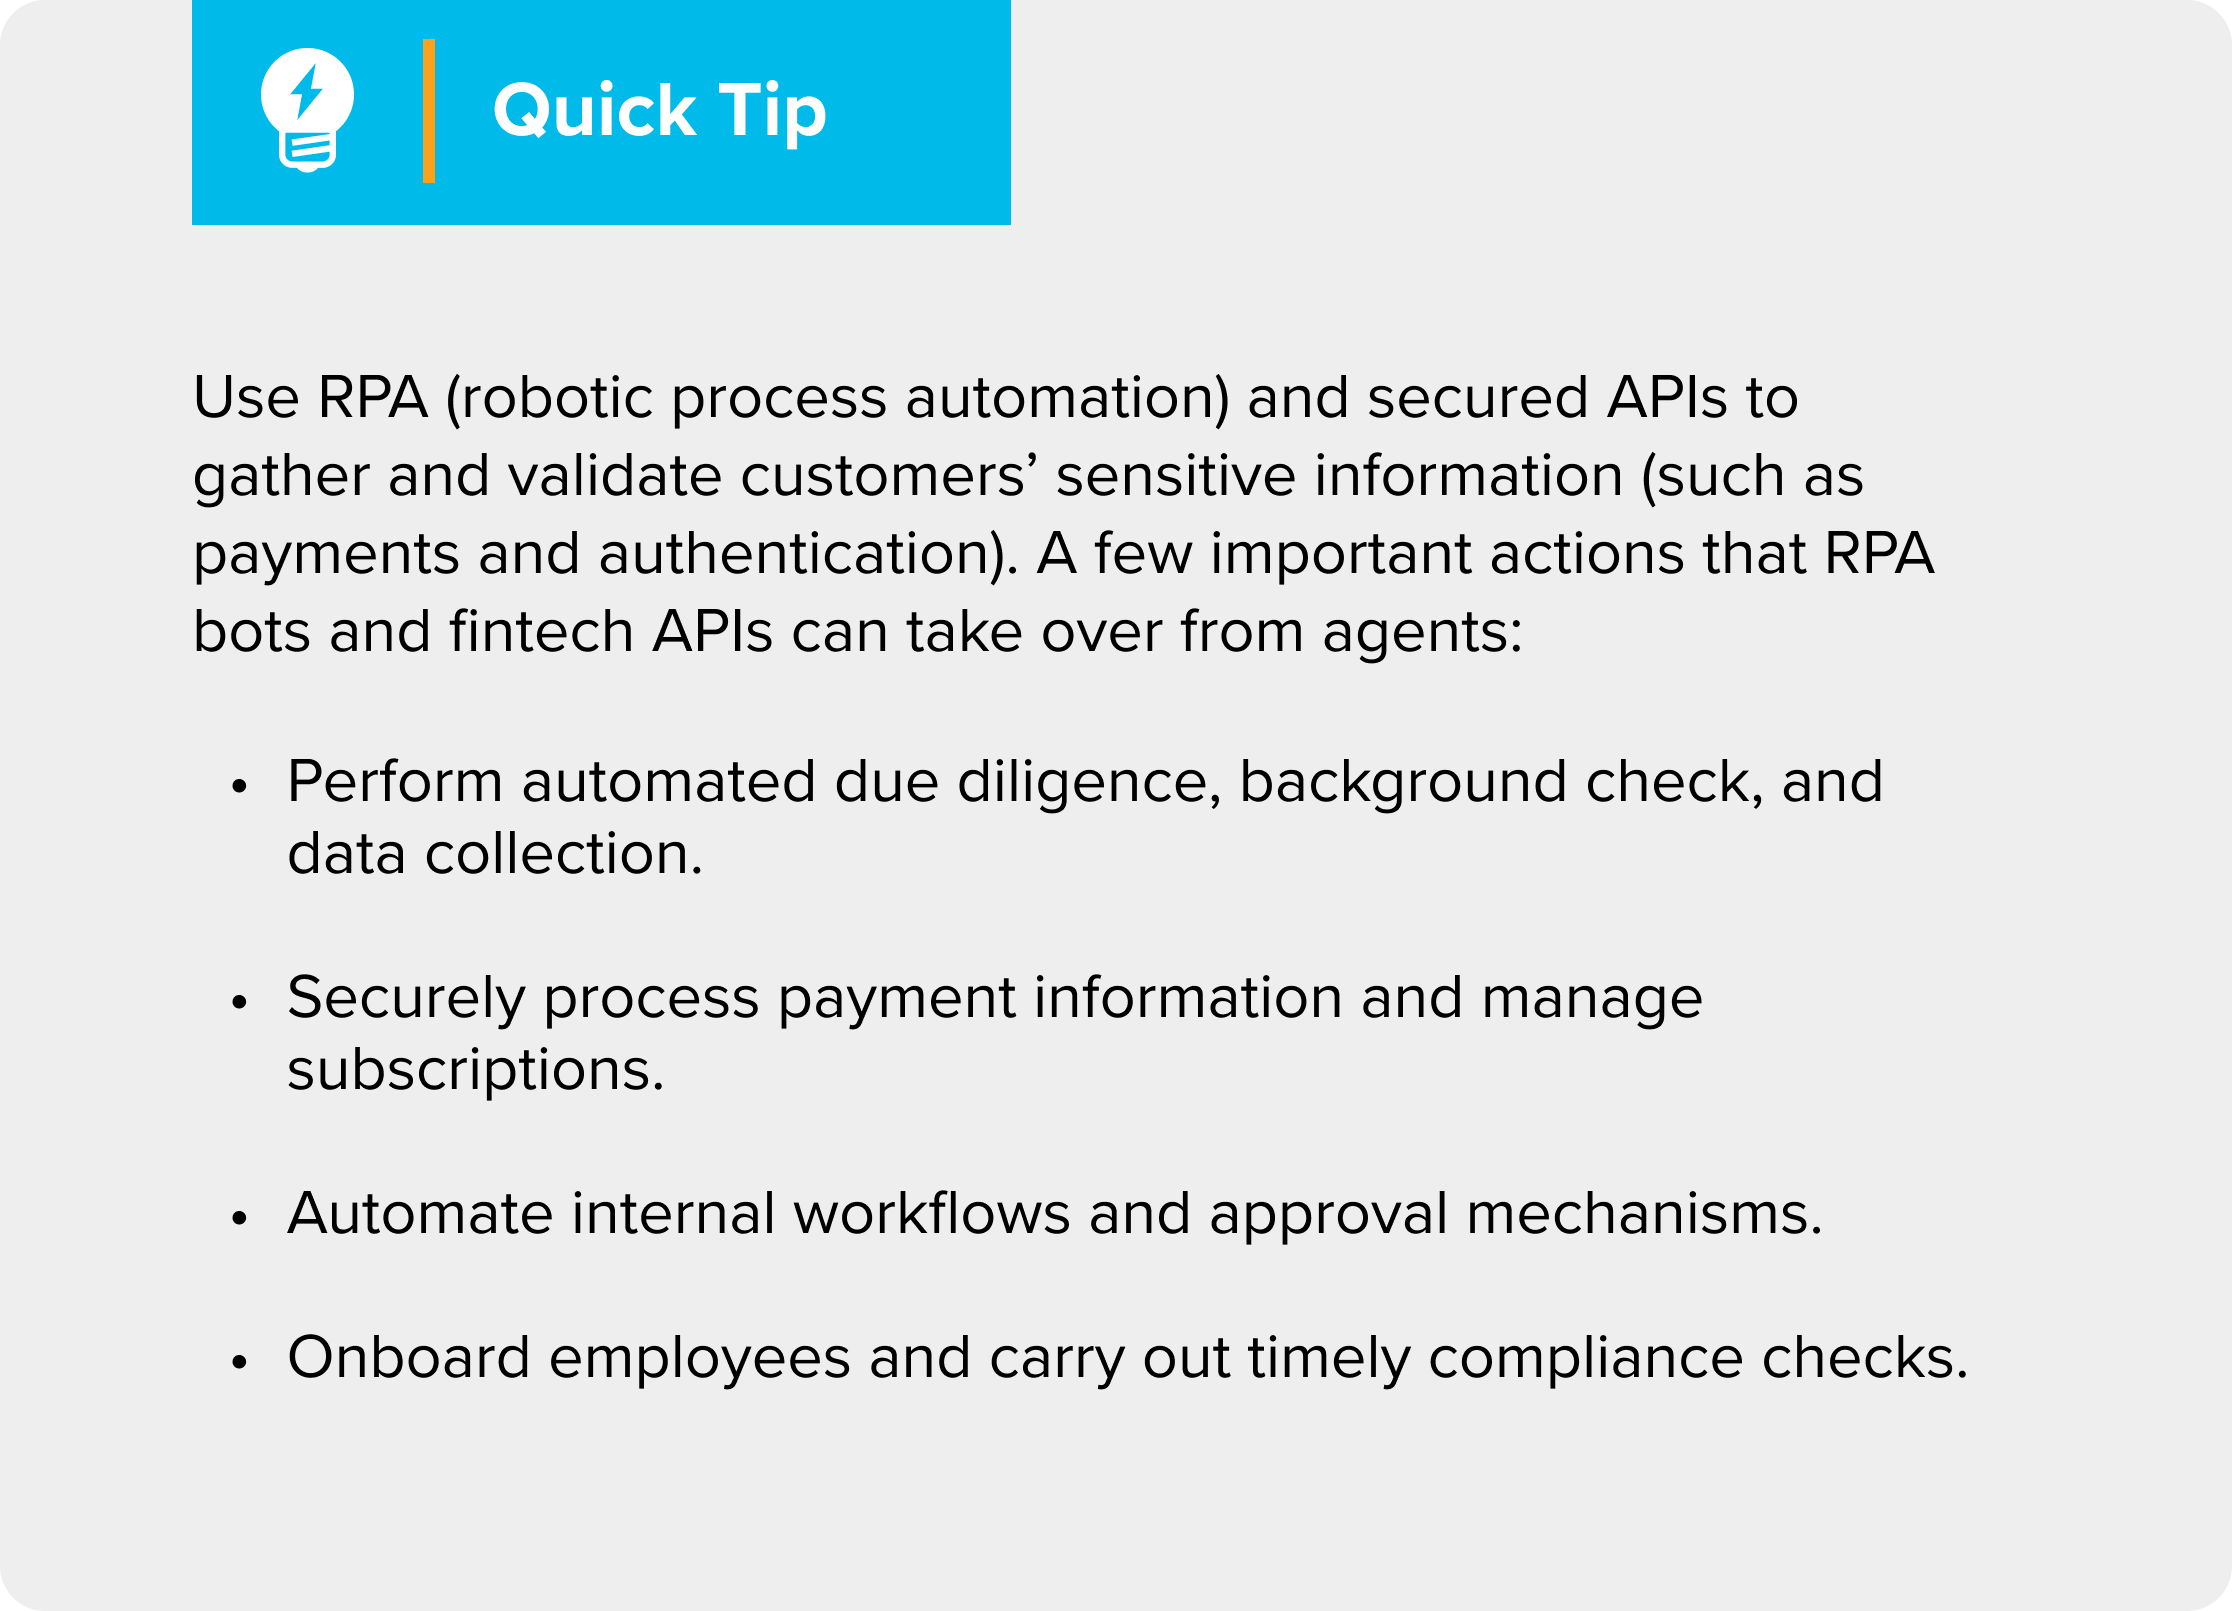 Quick tip RPA